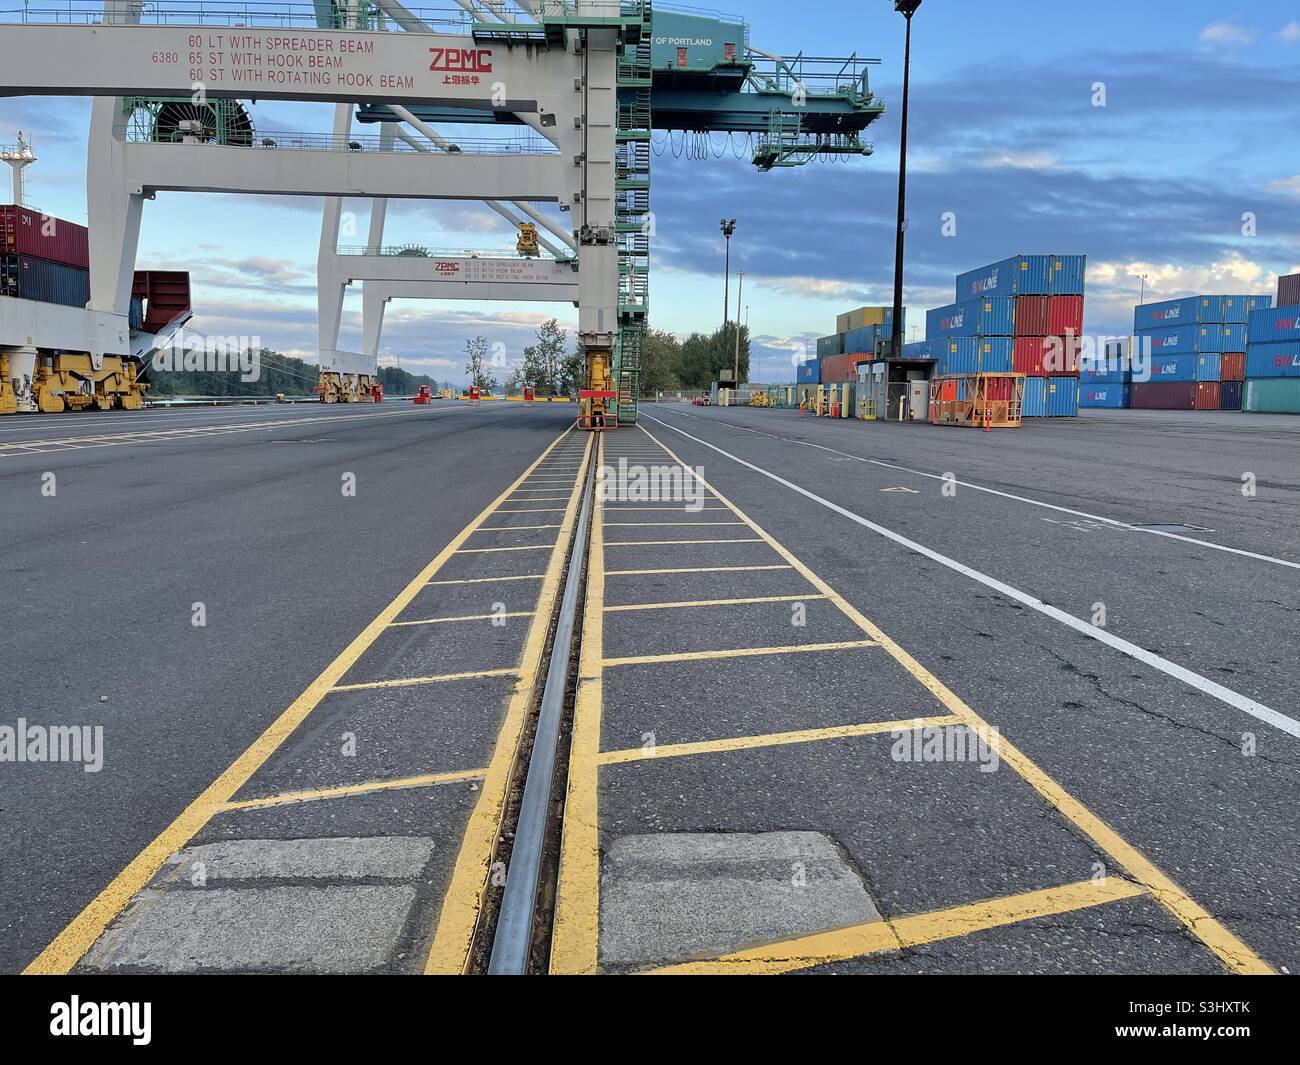 Steel rail of the gantry crane in Portland, Oregon USA container terminal ready for cargo loading operation to moored vessel. Stock Photo